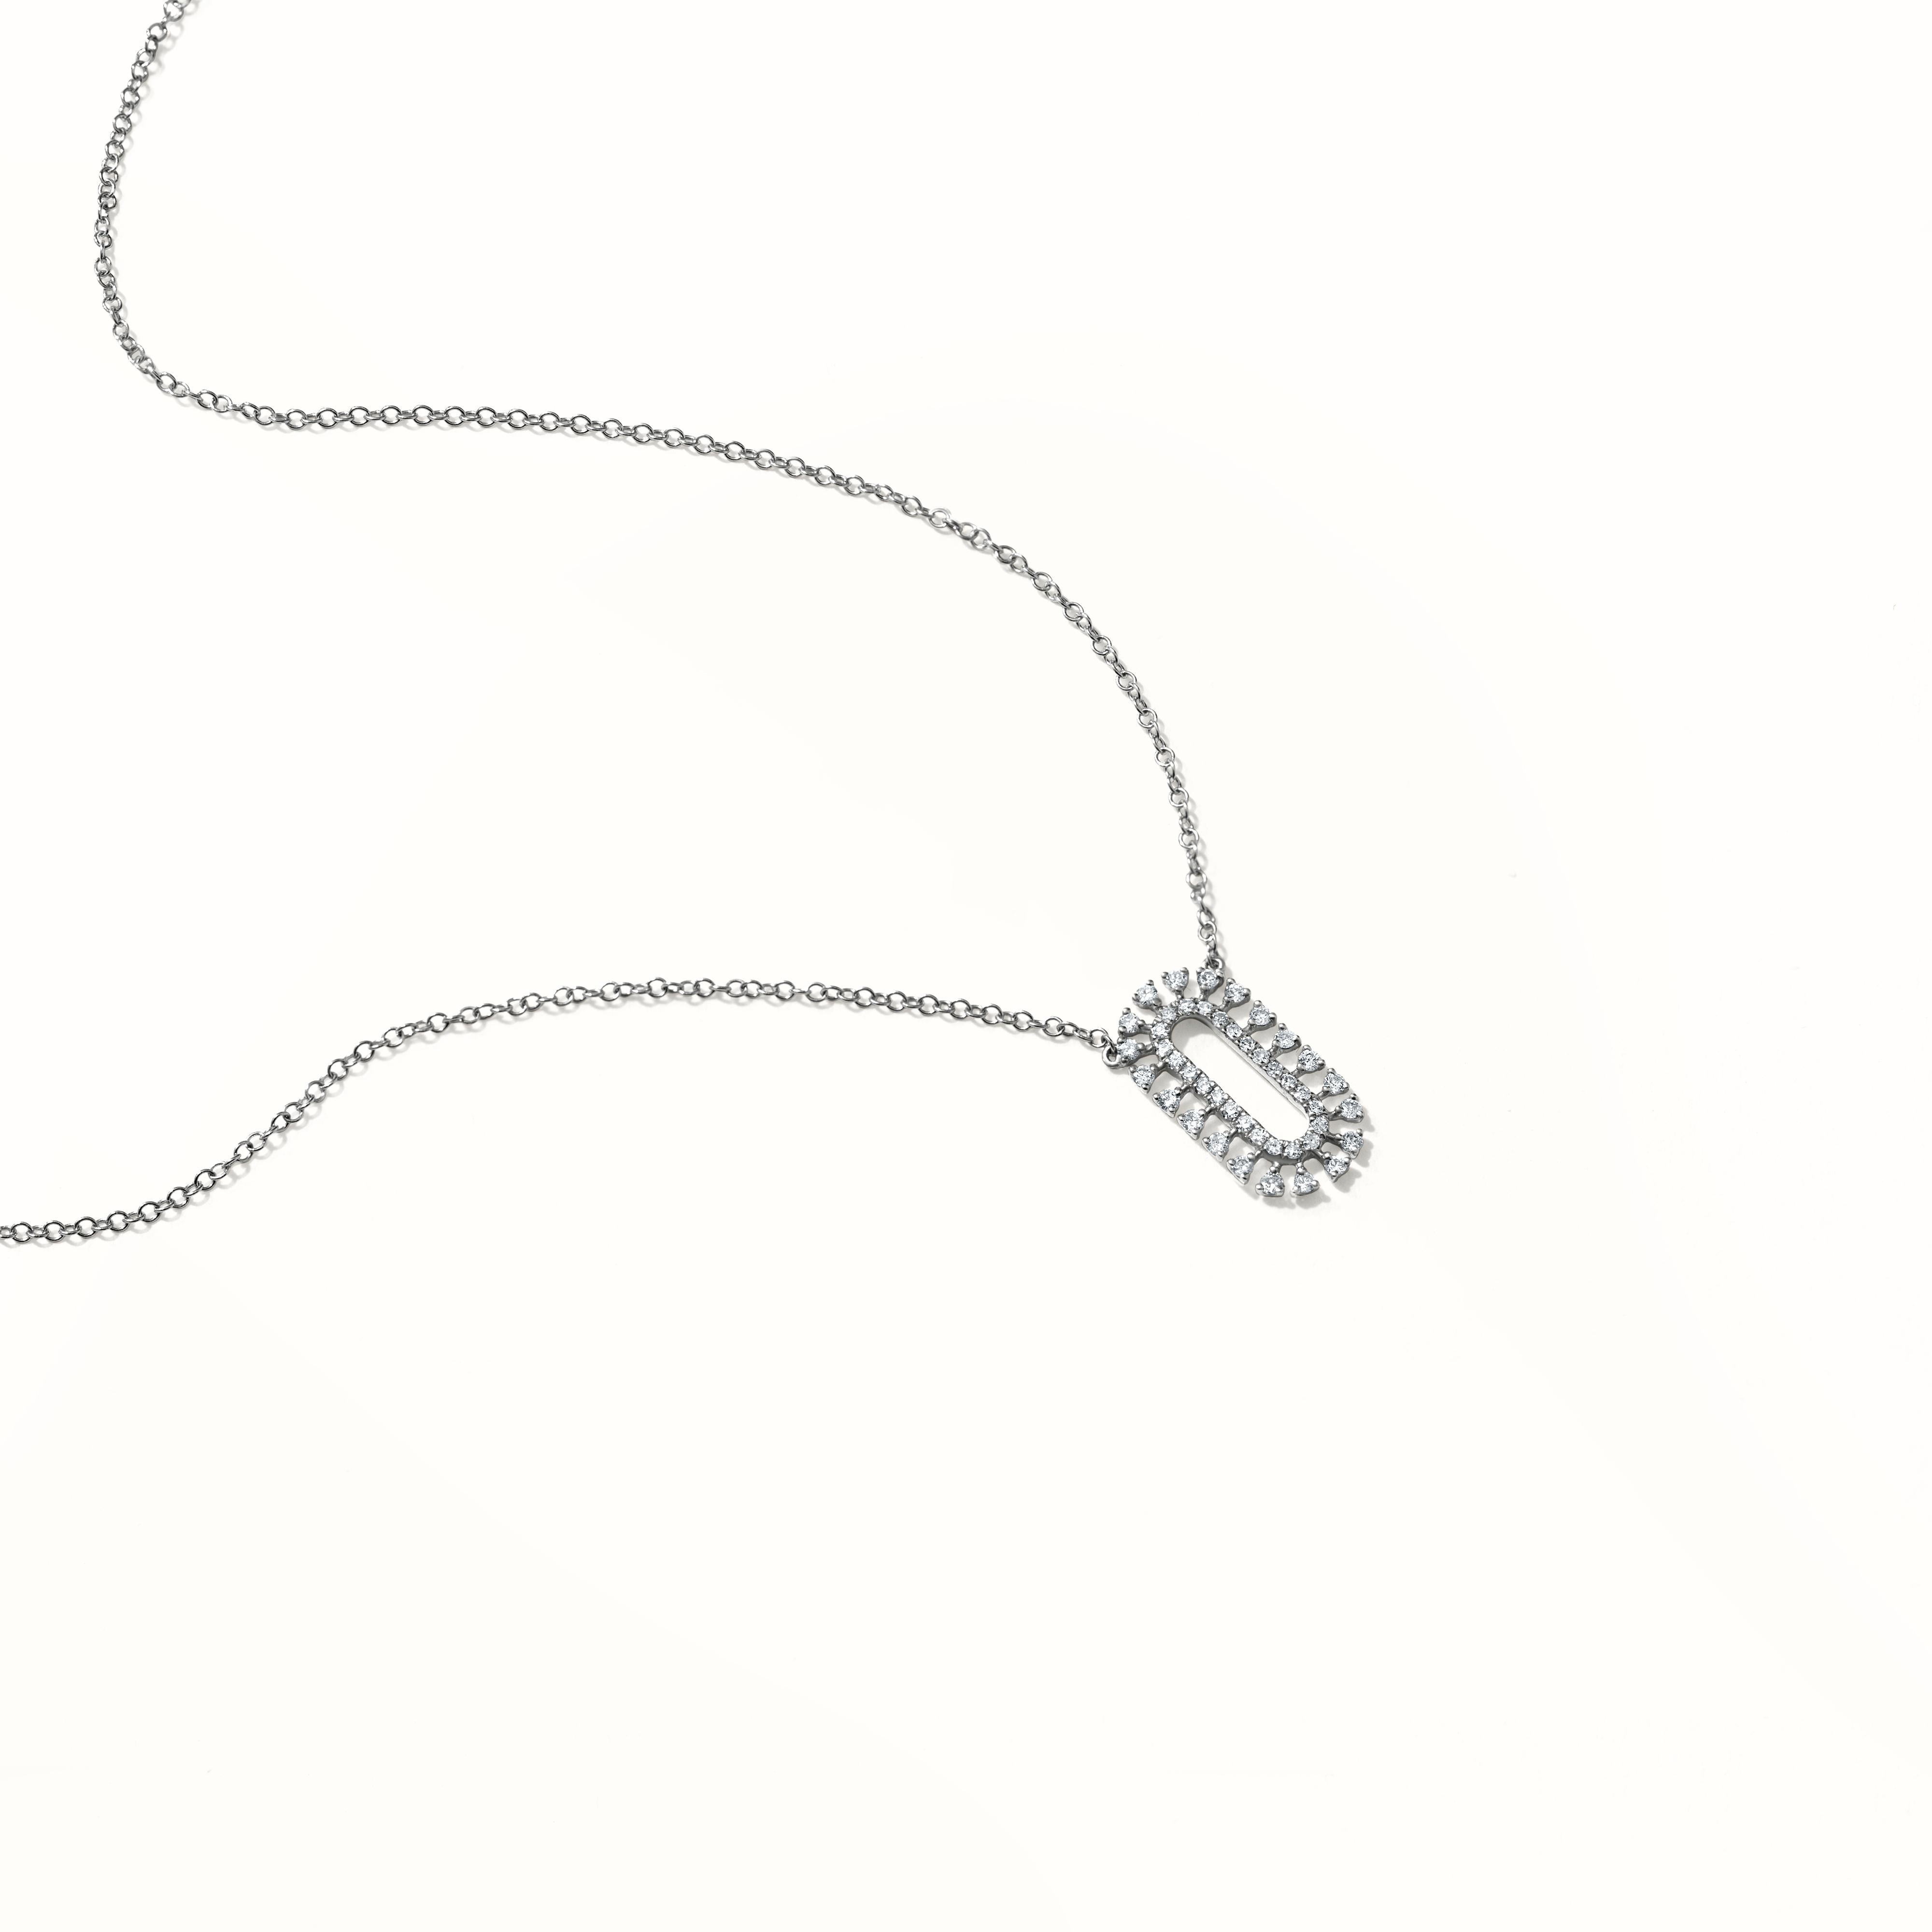 Freshen up your looks with this Luxle delicate necklace featuring an openwork oval pendant embellished with pave set diamonds suspended from a cable chain of 18K white gold.

Please follow the Luxury Jewels storefront to view the latest collections